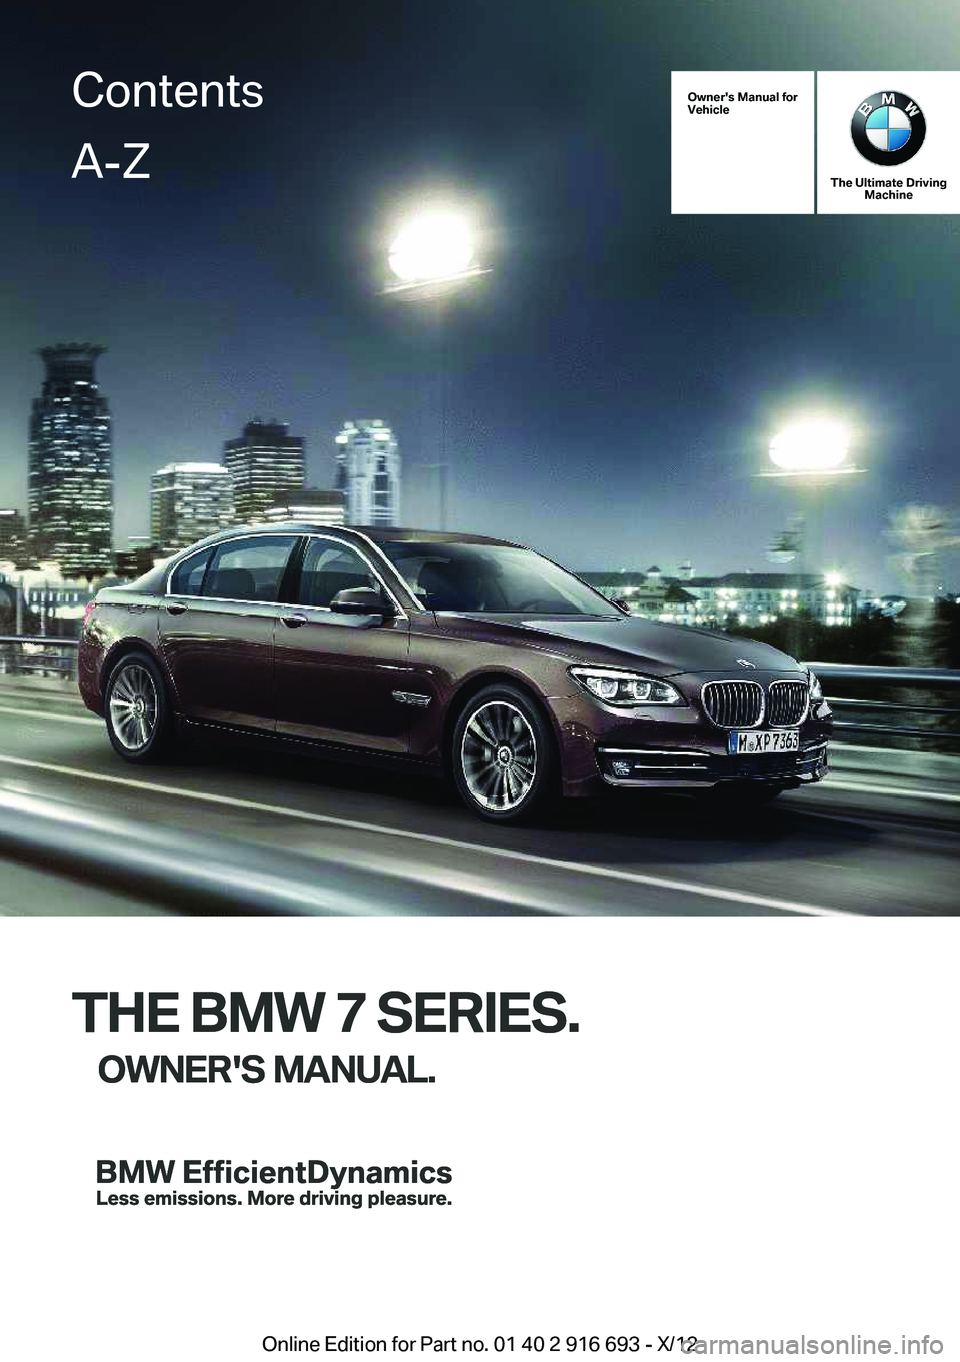 BMW 740LI XDRIVE 2013  Owners Manual Owner's Manual for
Vehicle
THE BMW 7 SERIES.
OWNER'S MANUAL.
The Ultimate Driving Machine
THE BMW 7 SERIES.
OWNER'S MANUAL.
ContentsA-Z
Online Edition for Part no. 01 40 2 916 693 - X/12  